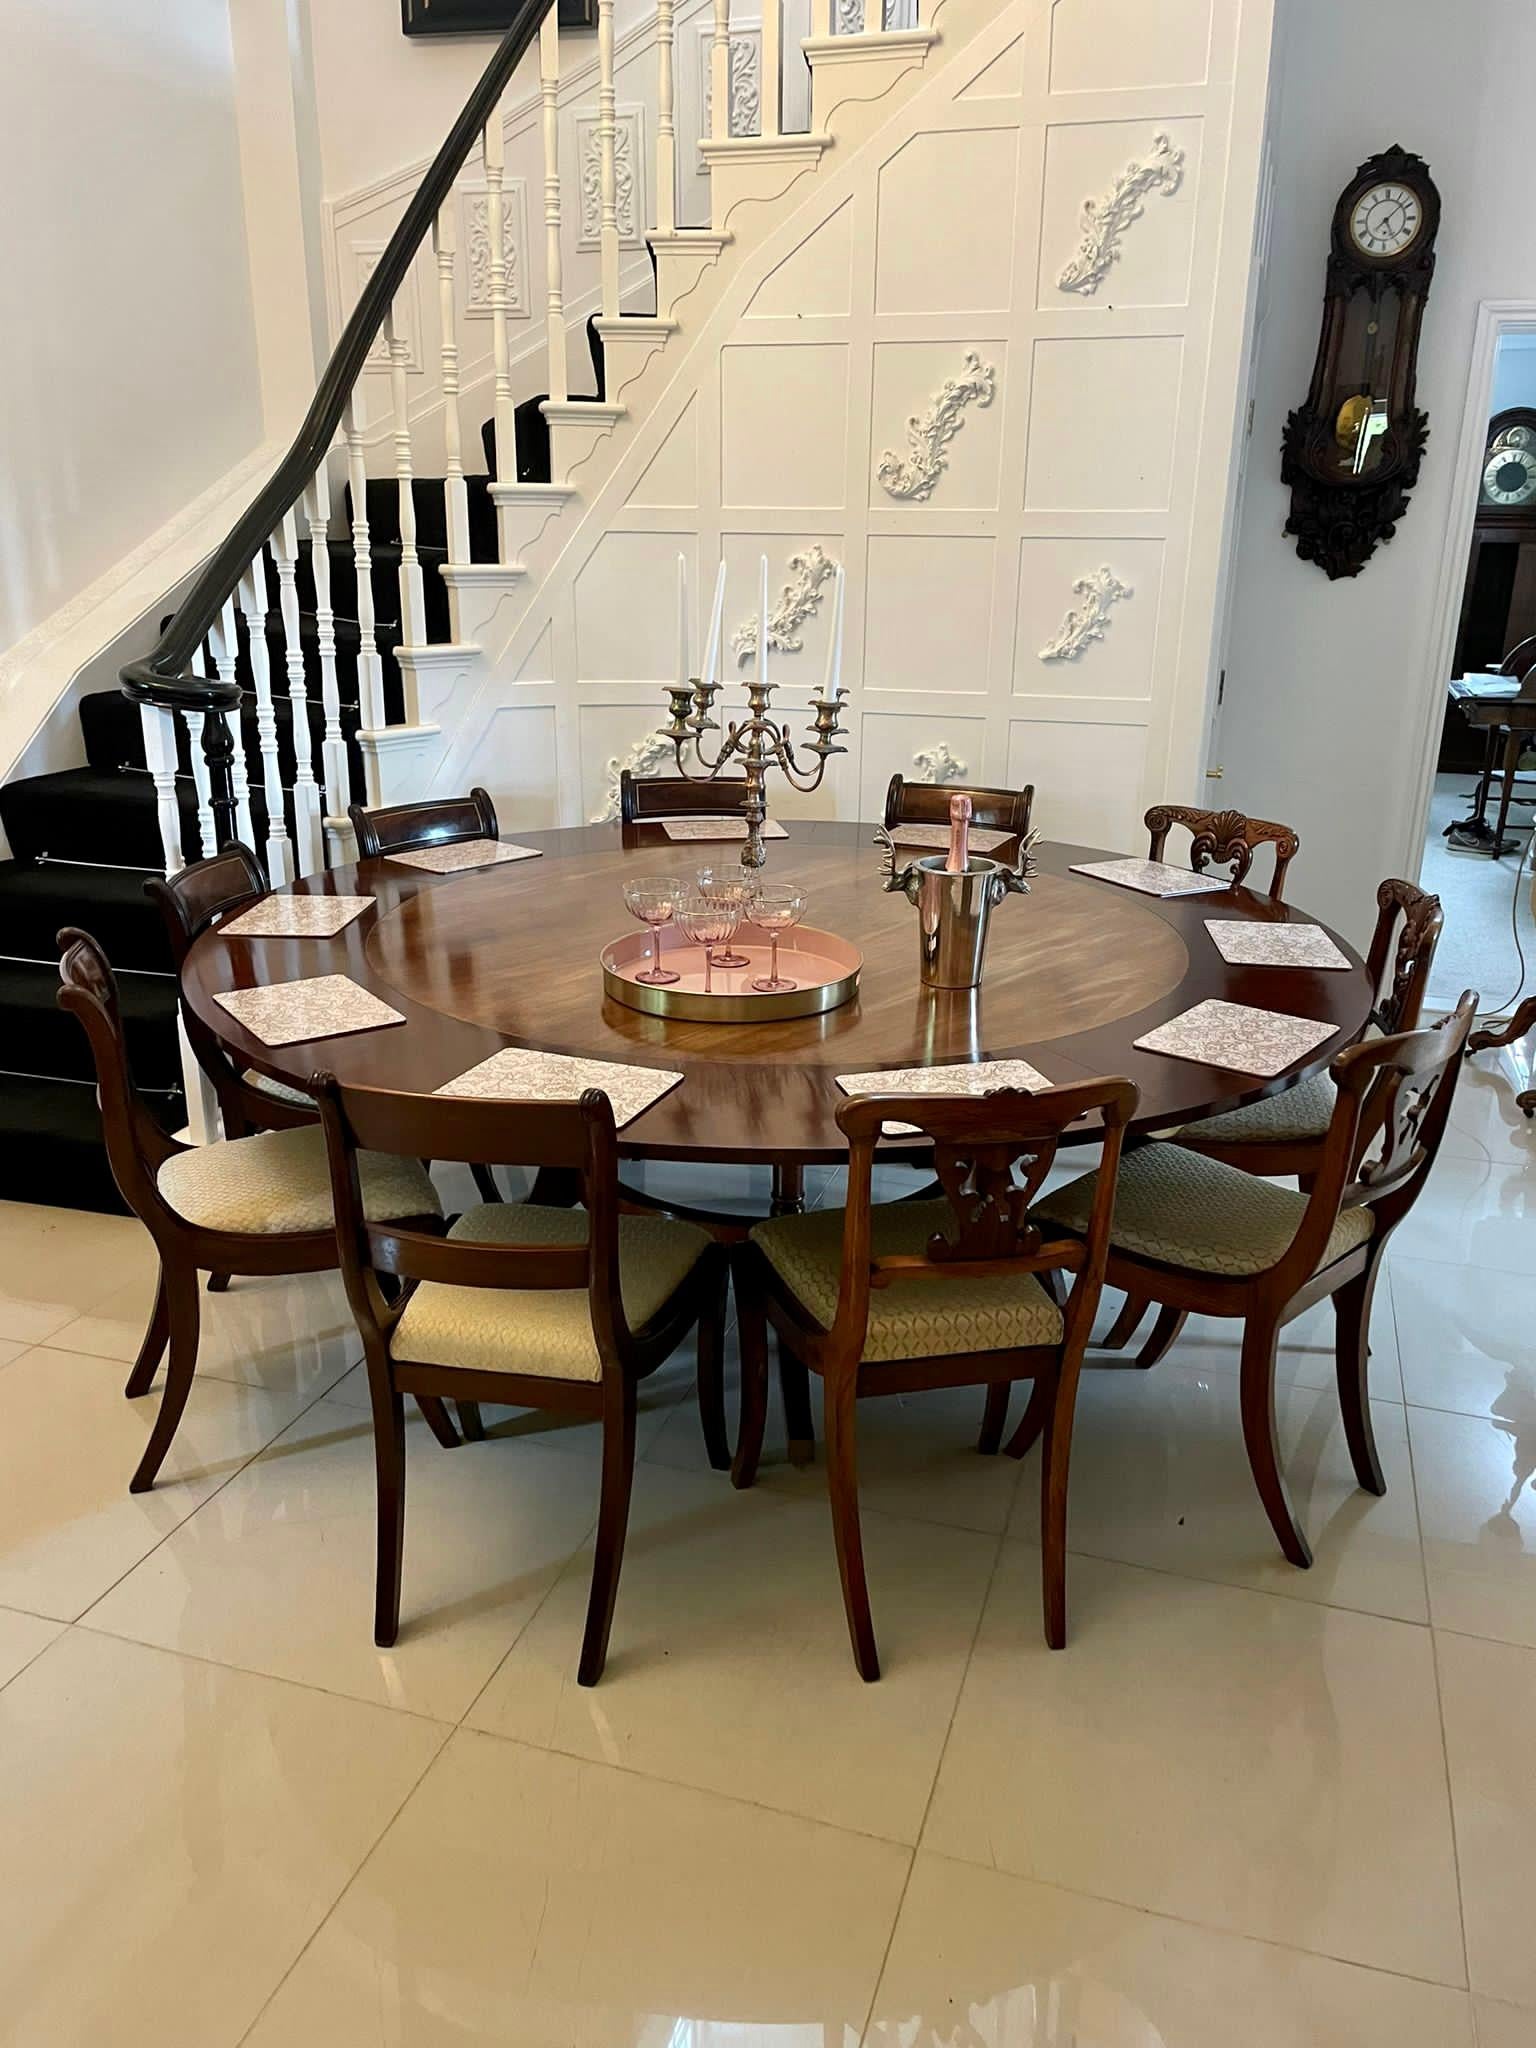 Superb quality figured mahogany antique circular extending 10 seater dining table having a moulded edge with 5 extra leaves supported by turned mahogany columns standing on shaped sabre legs with original brass feet united by a circular mahogany